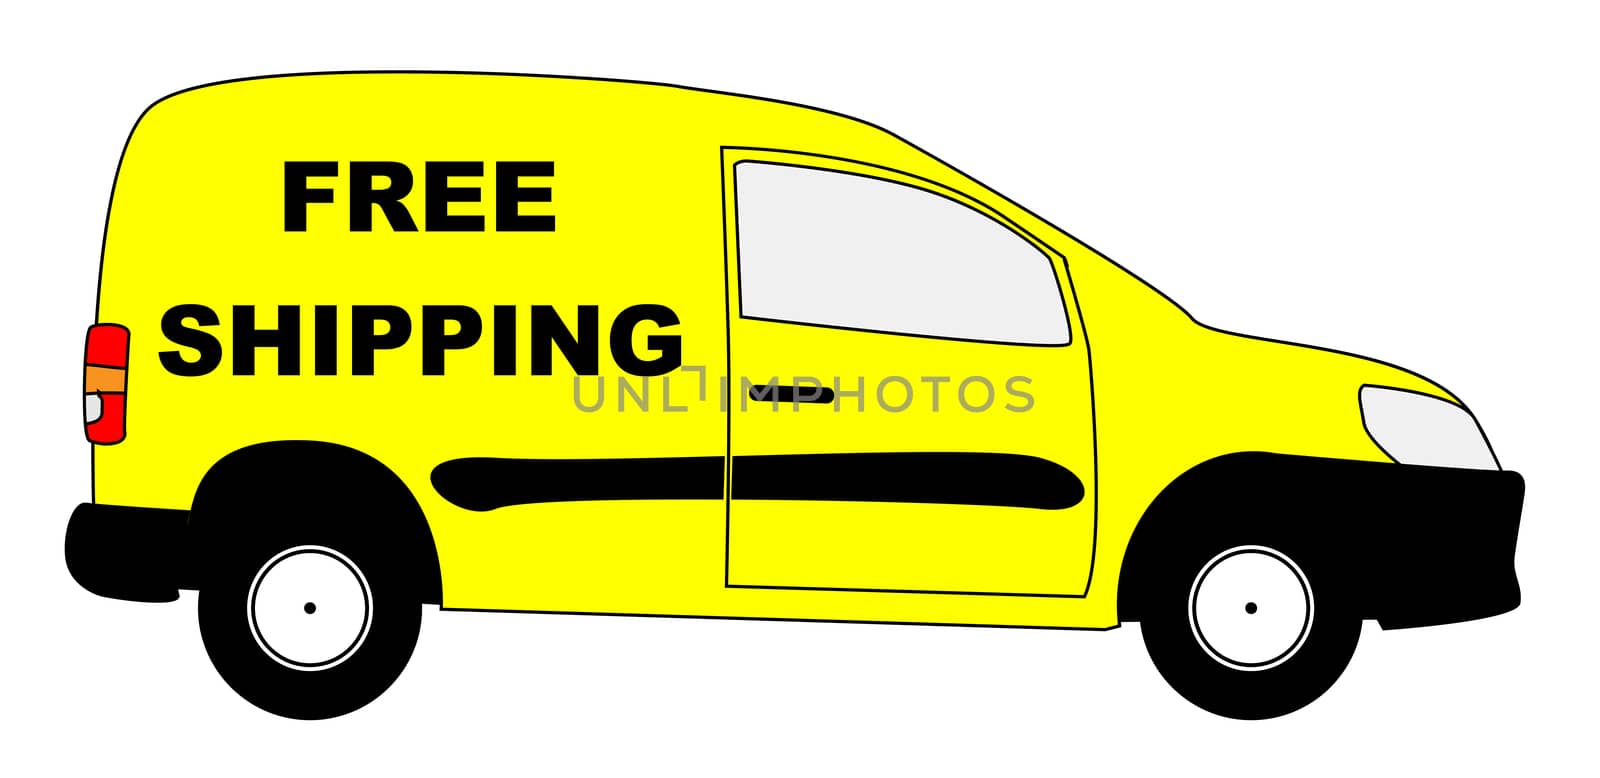 A small delivery van with text FREE SHIPPING isolated on a white background